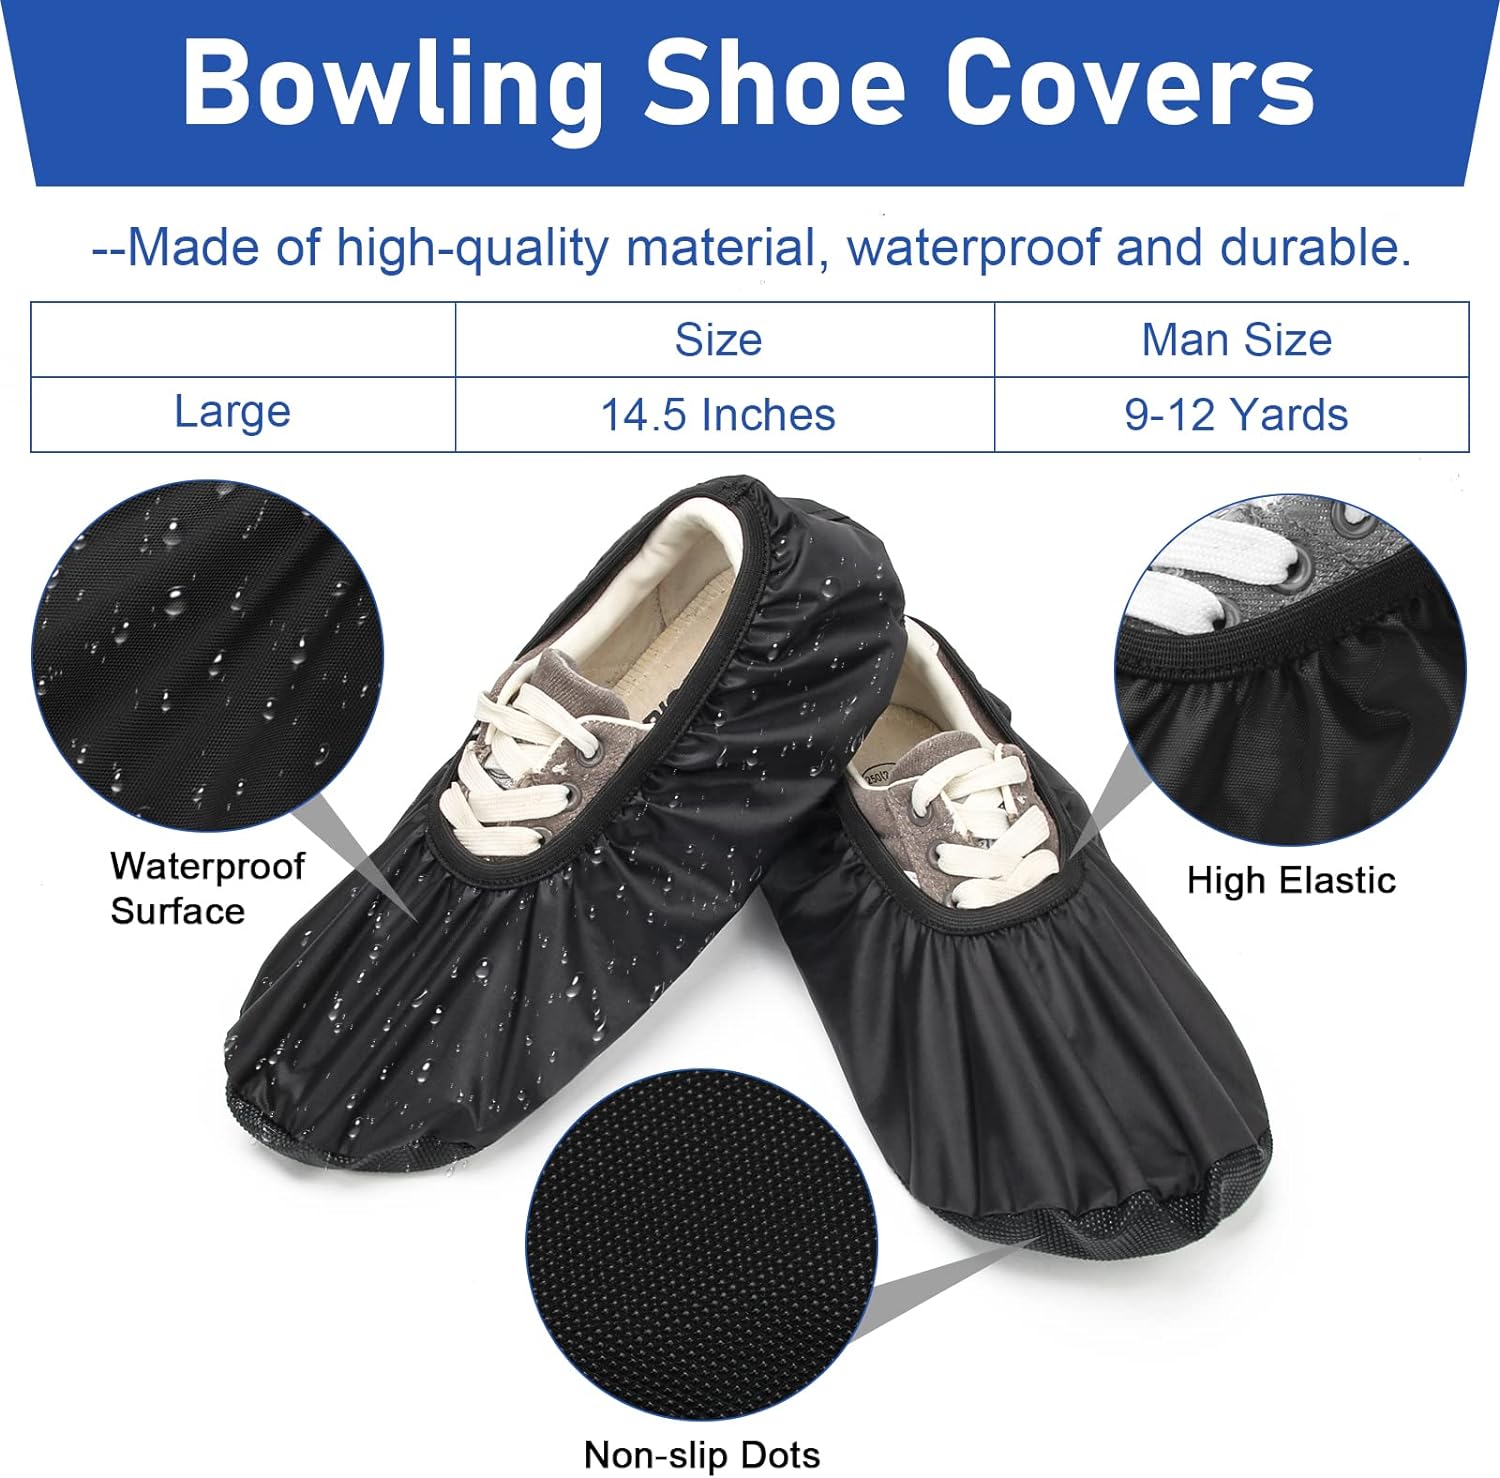 COITEK Bowling Shoe Covers, Shoe Protector Covers for Bowling Shoe Waterproof Reusable and Anti Slip